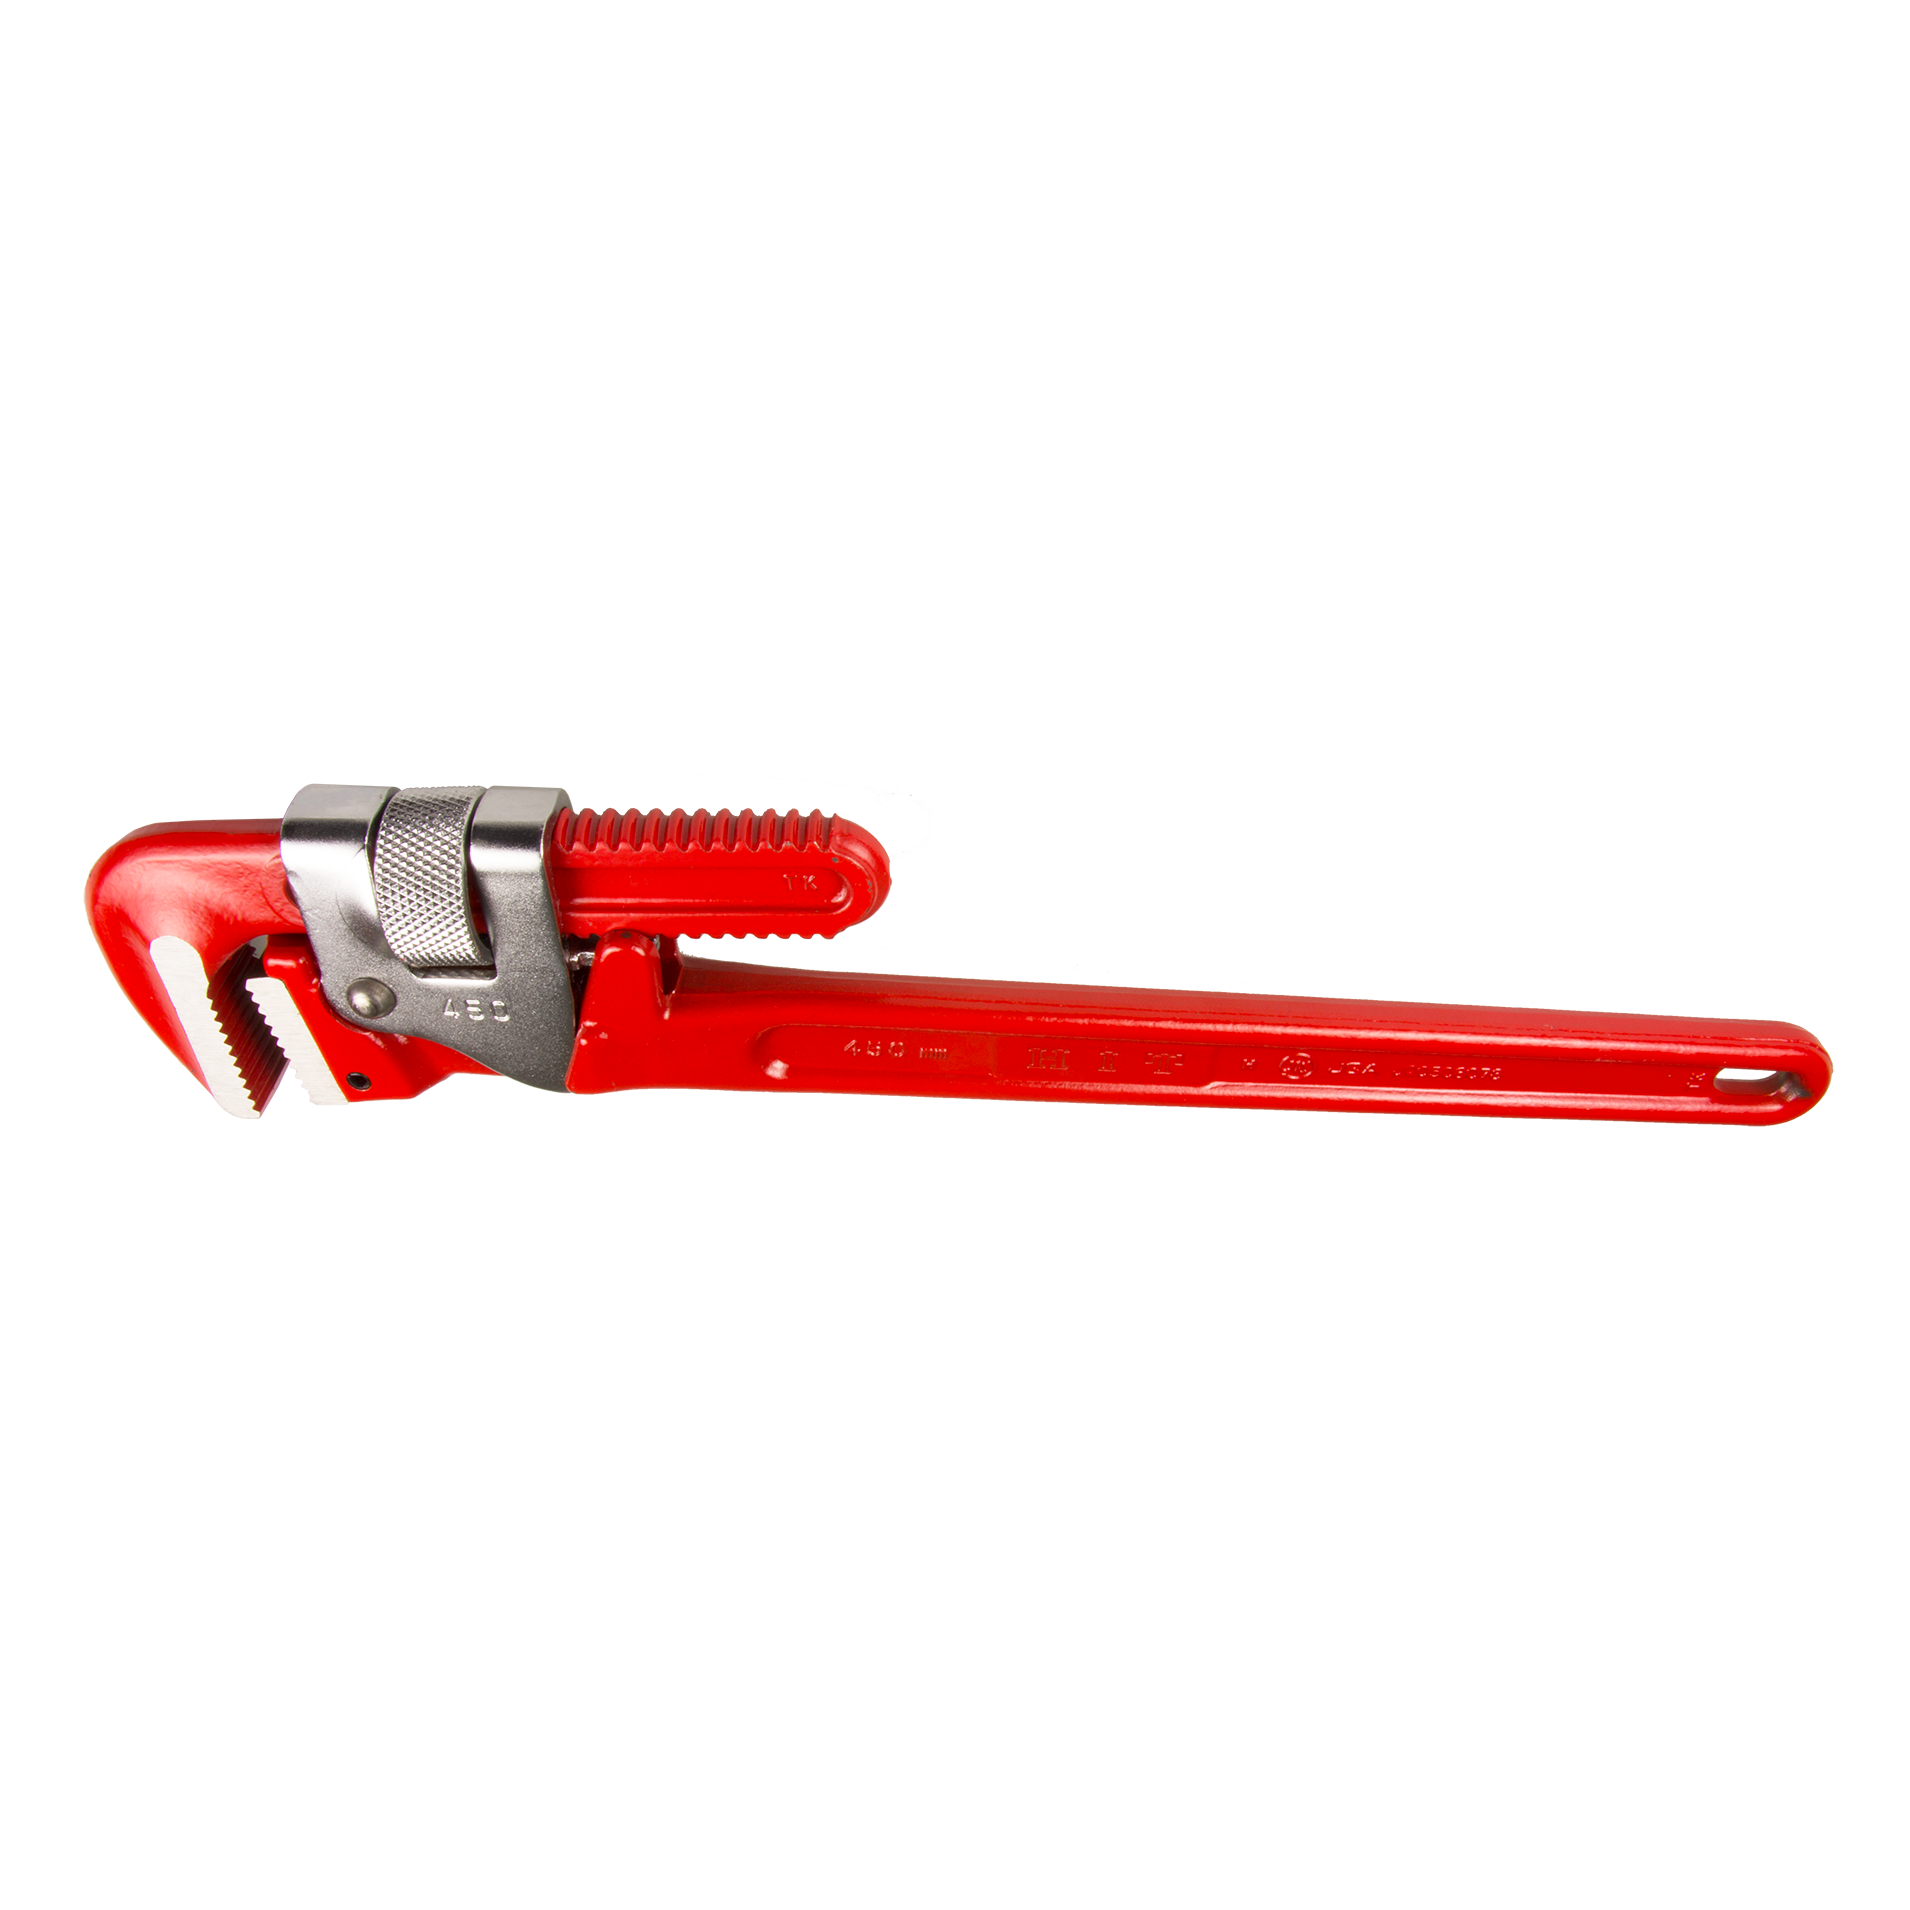 #PU-450mm DROP FORGE STEEL PIPE WRENCH - 80mm CAPACITY